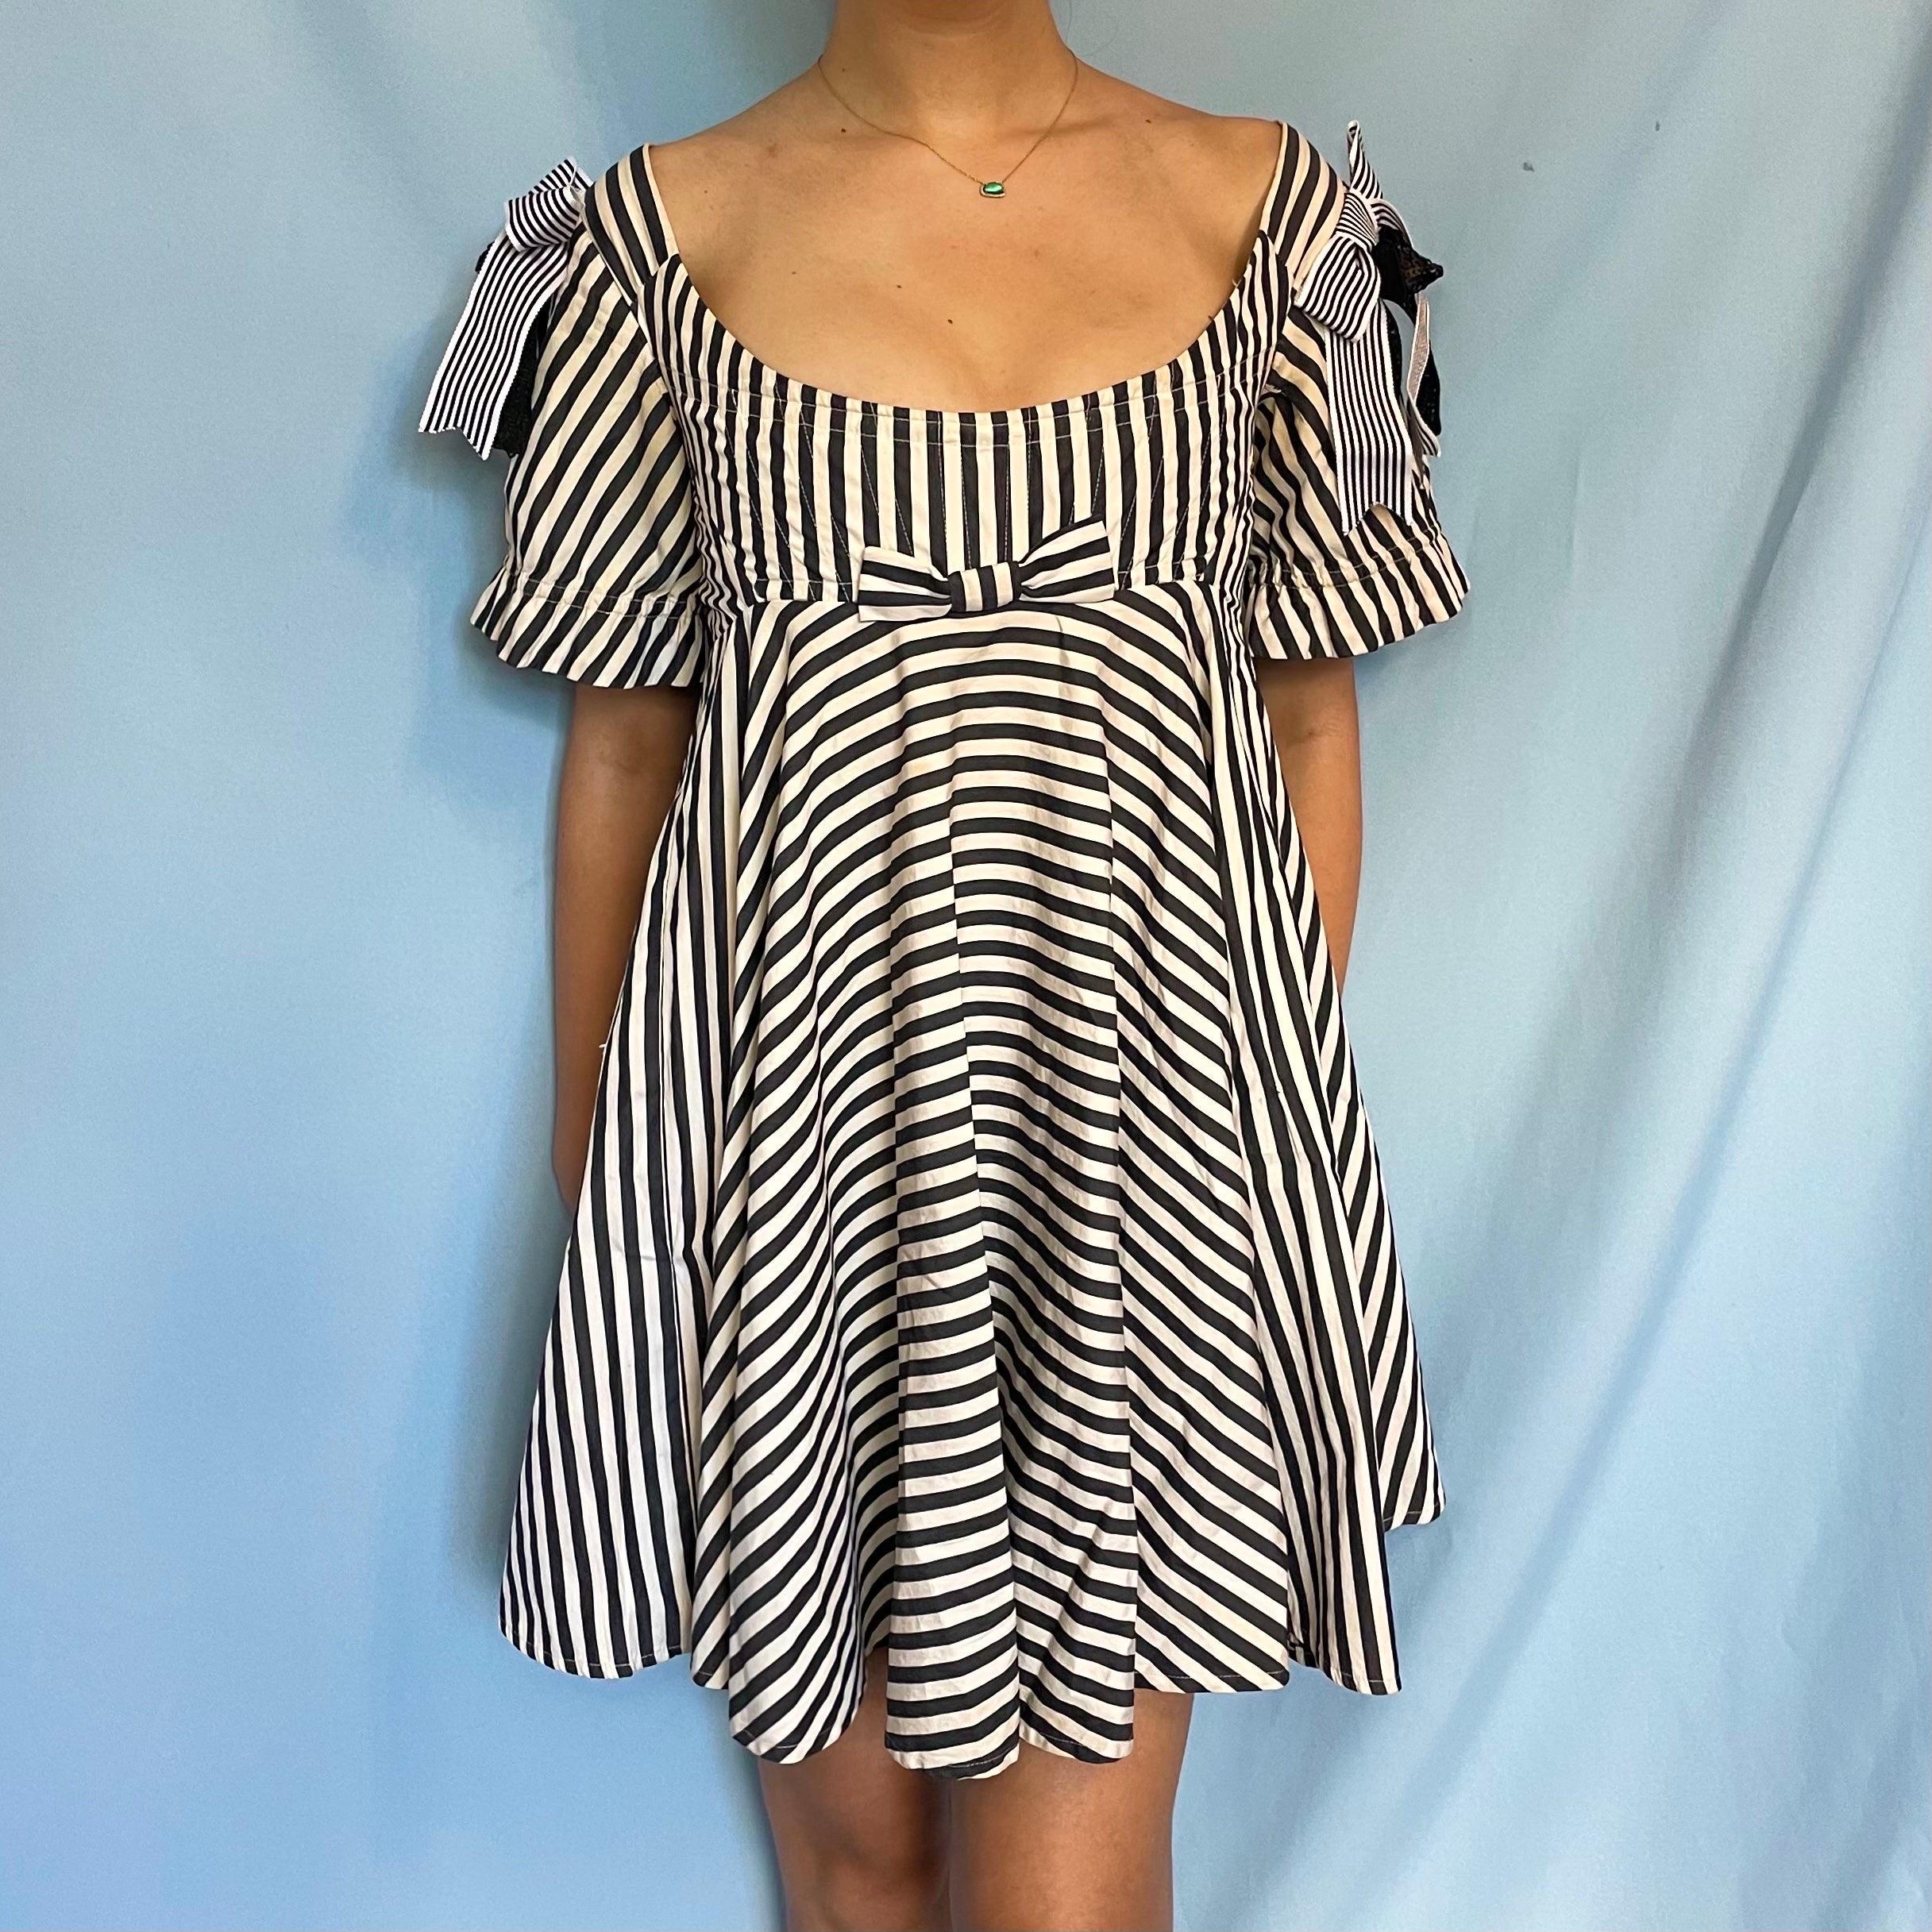 Vintage Vivienne Westwood

From Spring 1992

Black & white striped babydoll corseted dress 

Boned corset top inside dress 

Zip up centre back

Size IT 42 / UK 10 / US 6 

Measurements -

Bust of boned corset - 32” 

Length from centre neckline to